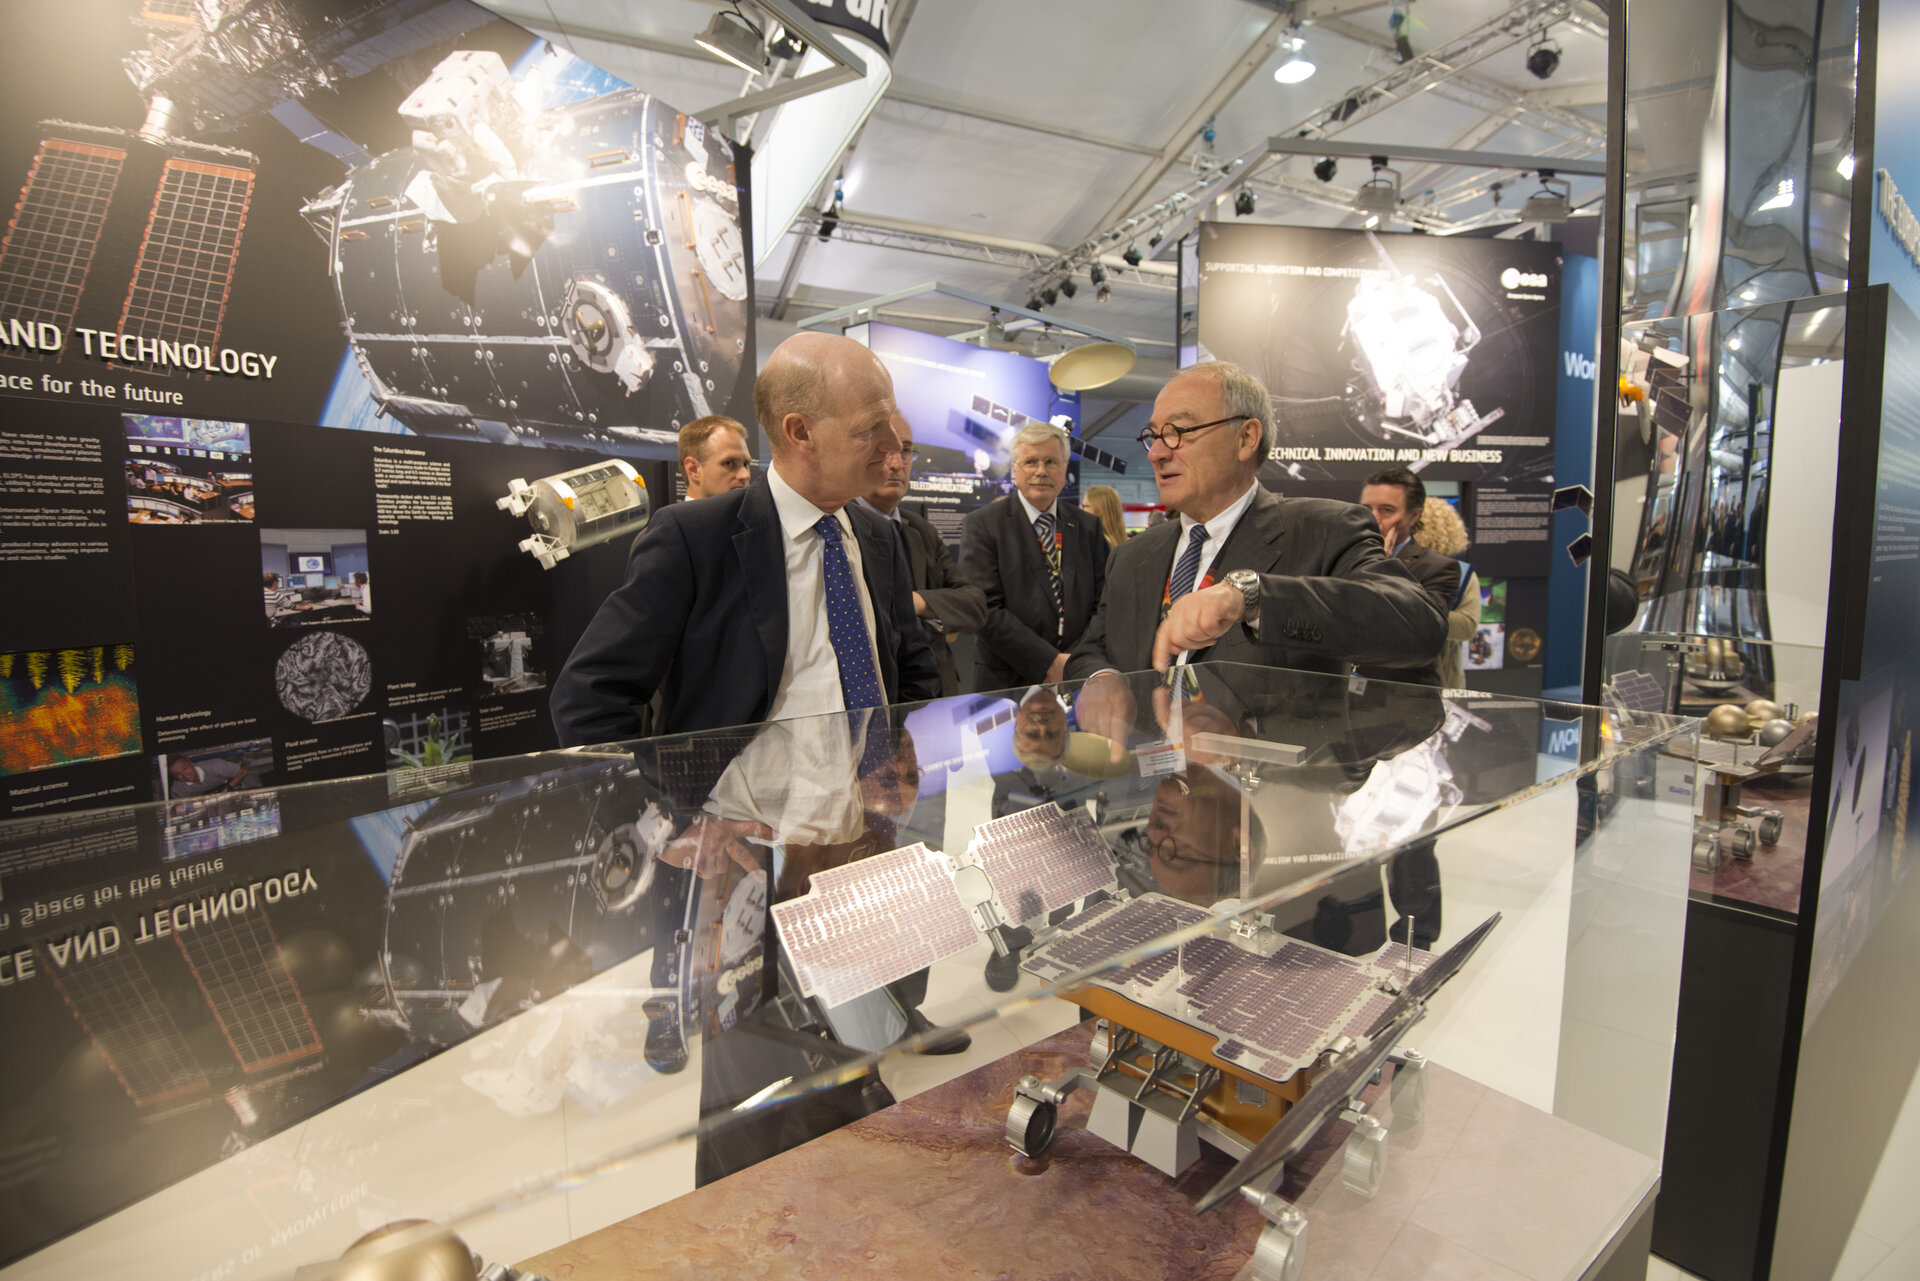 David Willetts visits the ESA exhibition with Jean-Jacques Dordain at Farnborough airshow, 10 July 2012